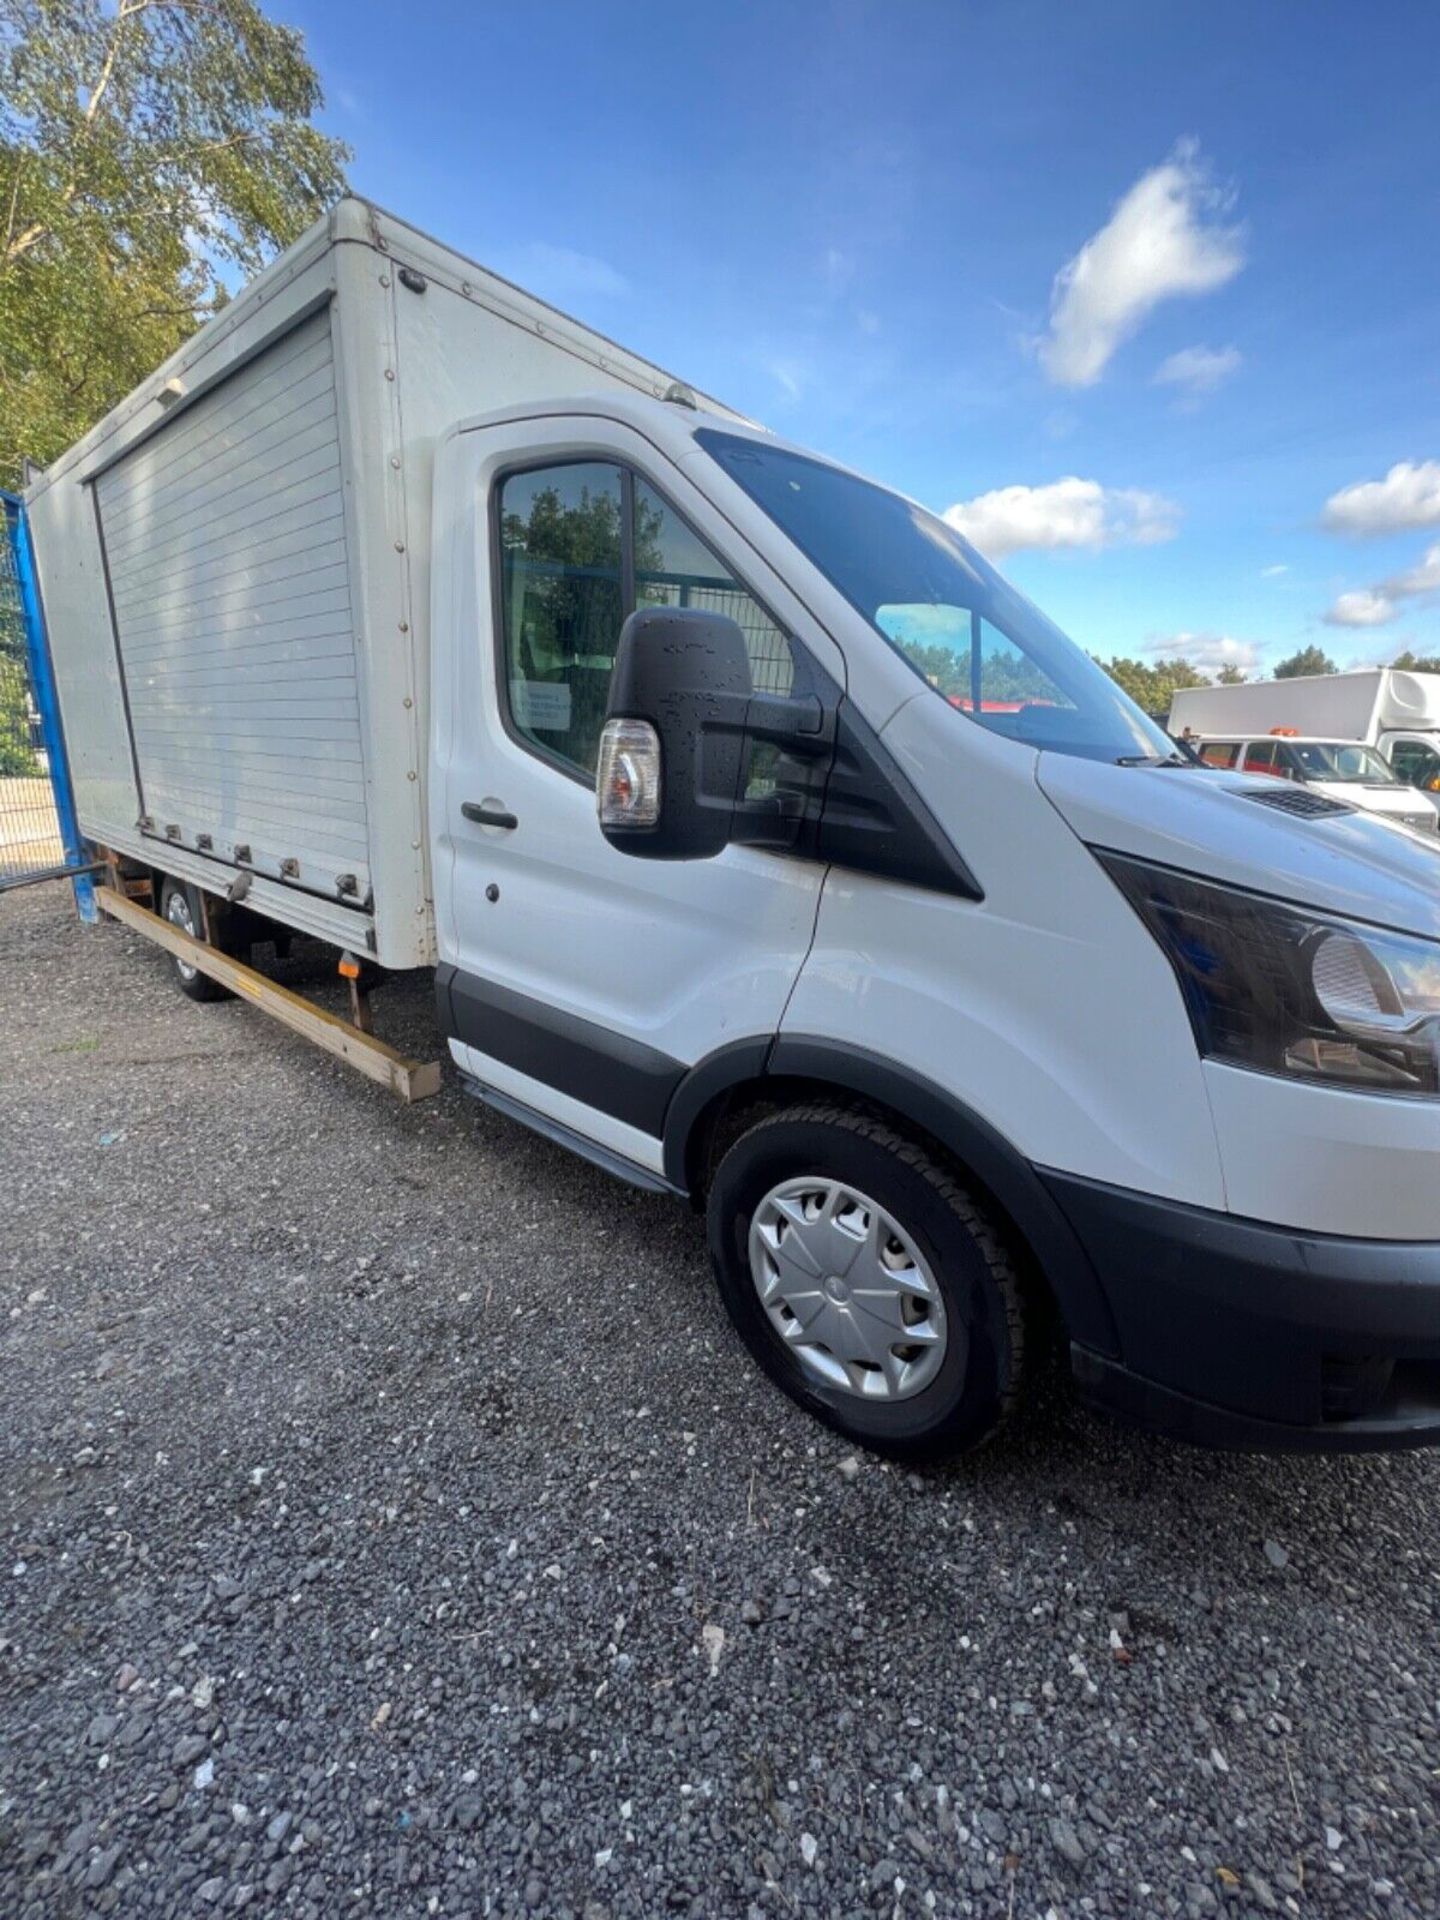 FORD TRANSIT BOX VAN 2017 LUTON EURO6 LWB 6 SPEED MANUAL 1COMPANY OWNER FROM NEW - Image 4 of 15